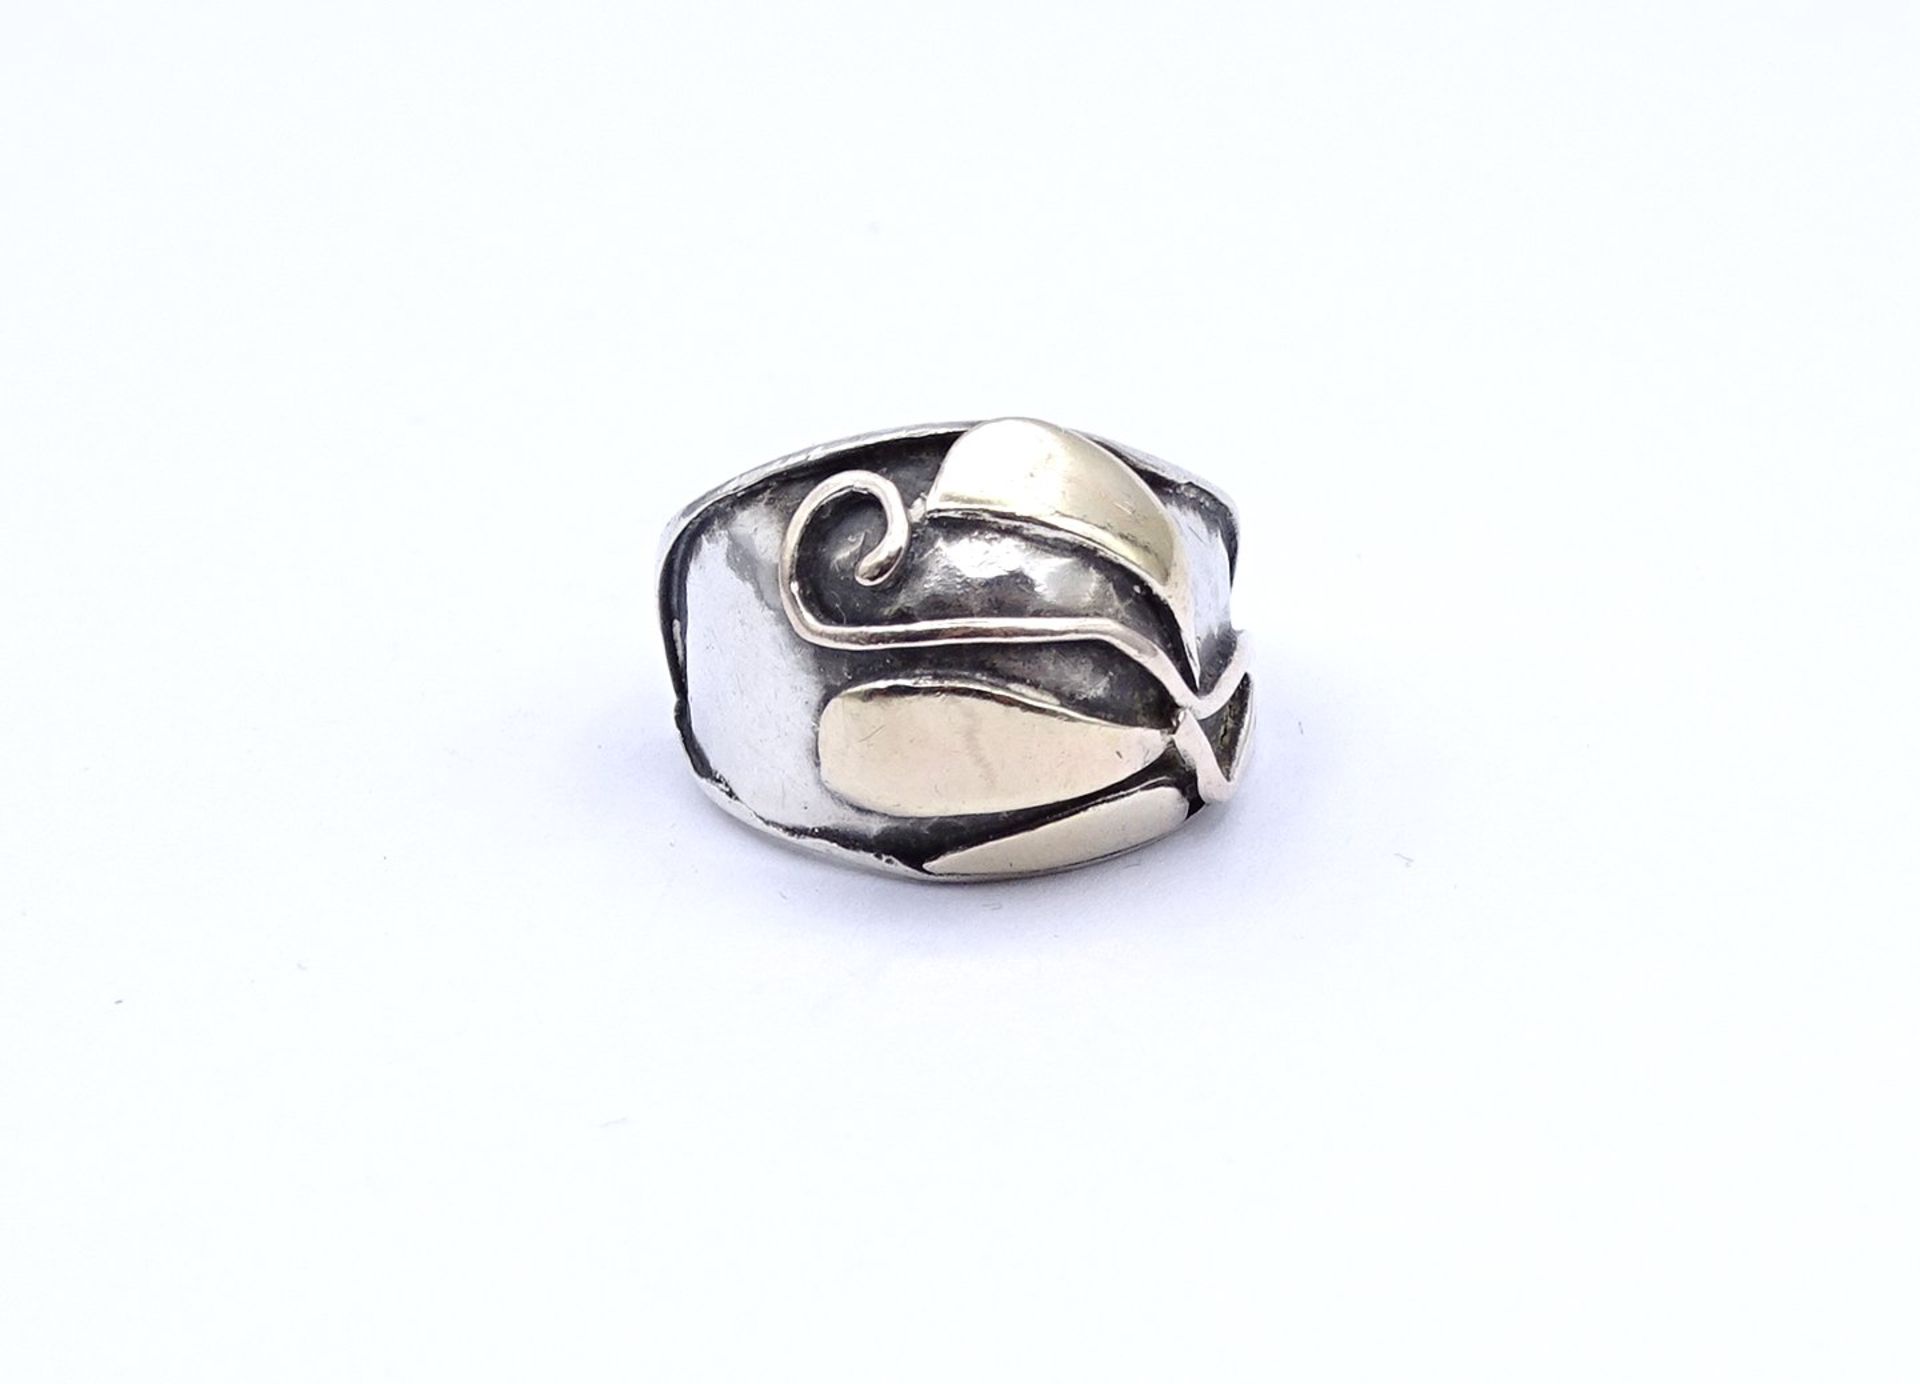 Silber + Gold Ring, AB bez. 6,6g., RG 49/50 - Image 4 of 4